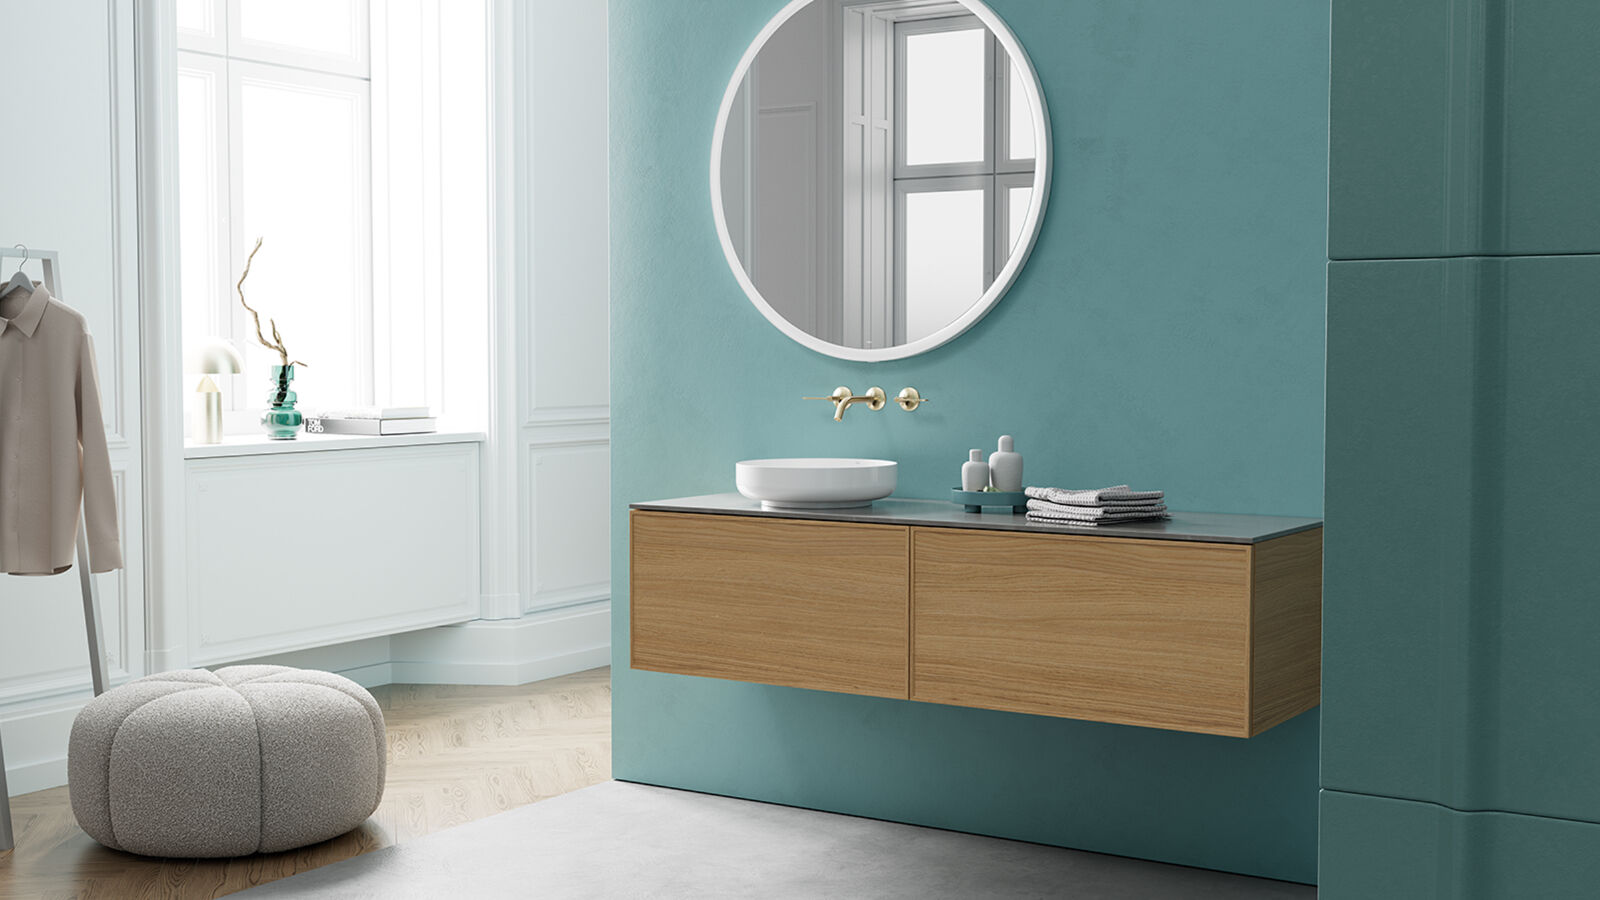 Minimalism with charm in the bathroom